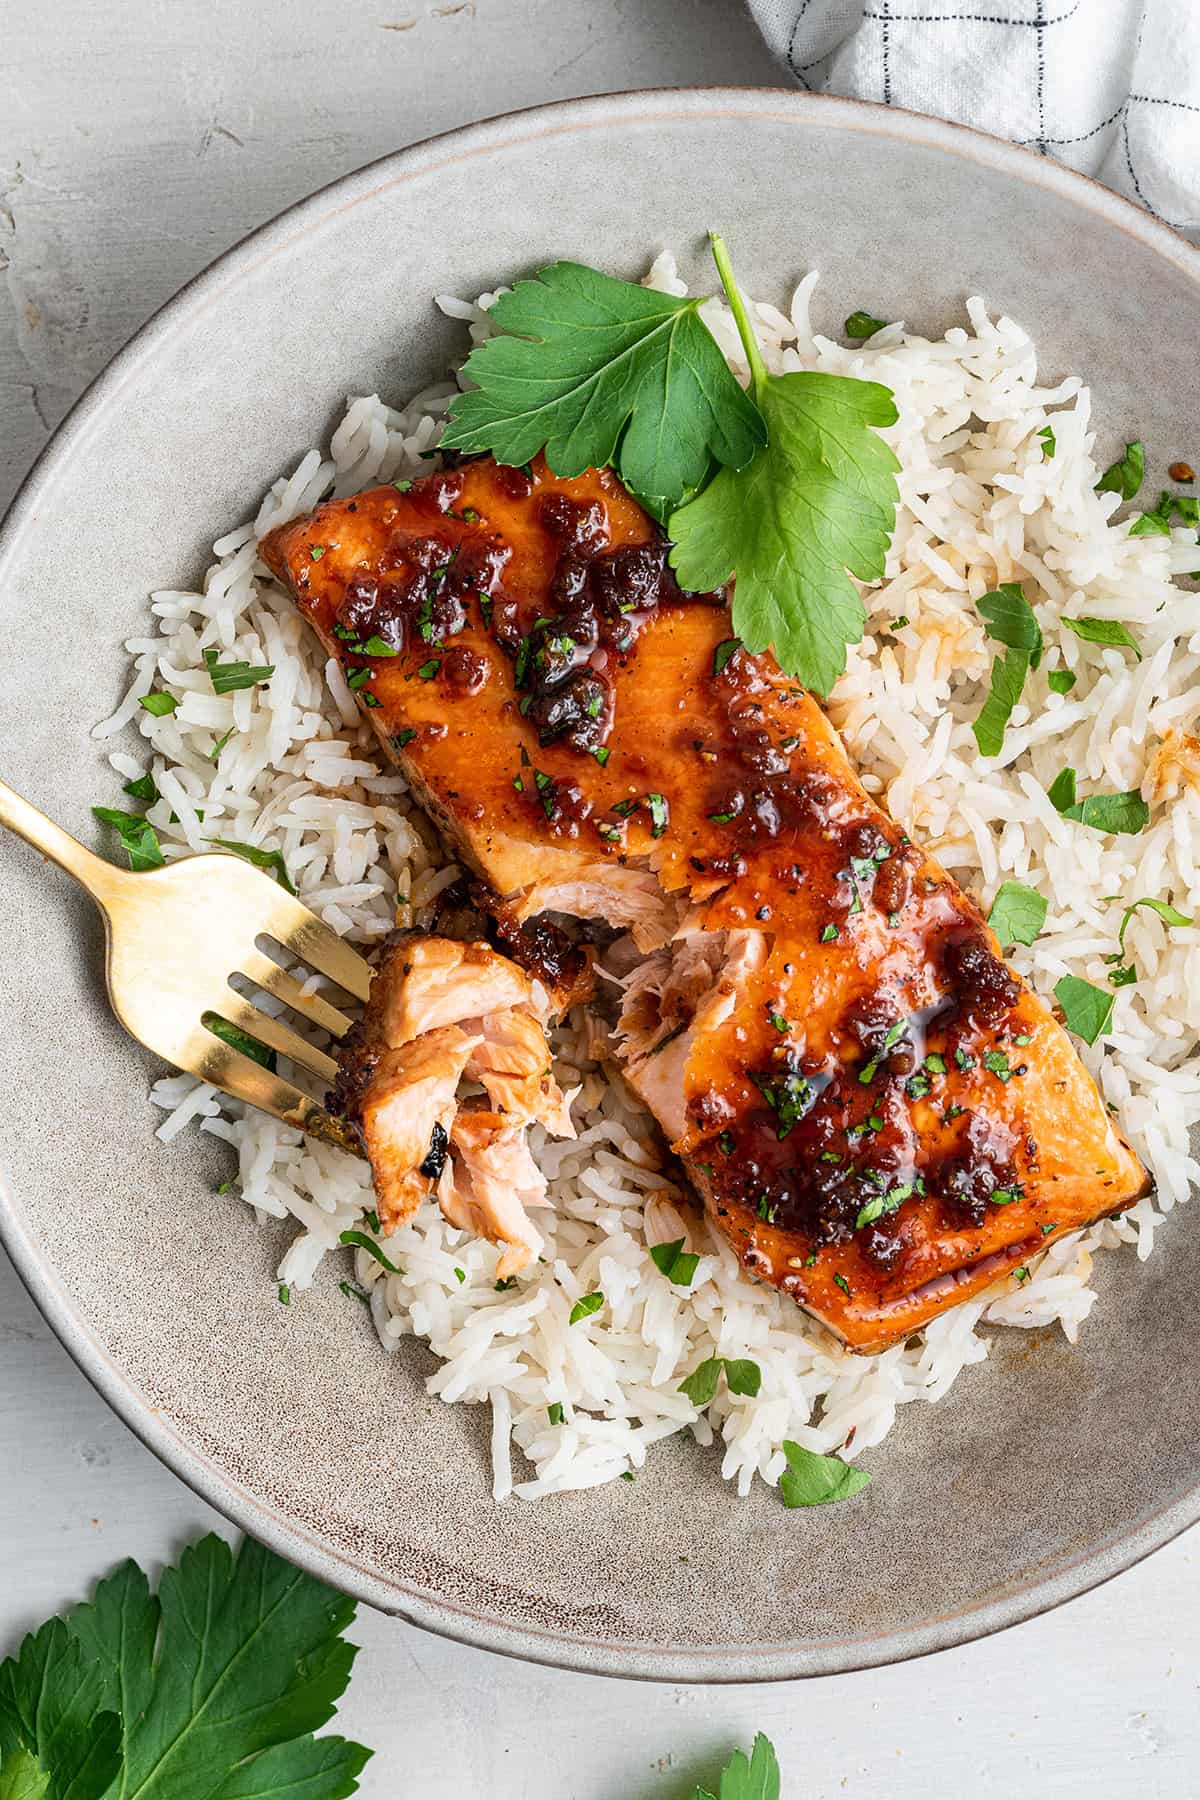 Overhead view of a honey glazed salmon filet on a bed of cilantro rise, with a fork holding a bite of salmon